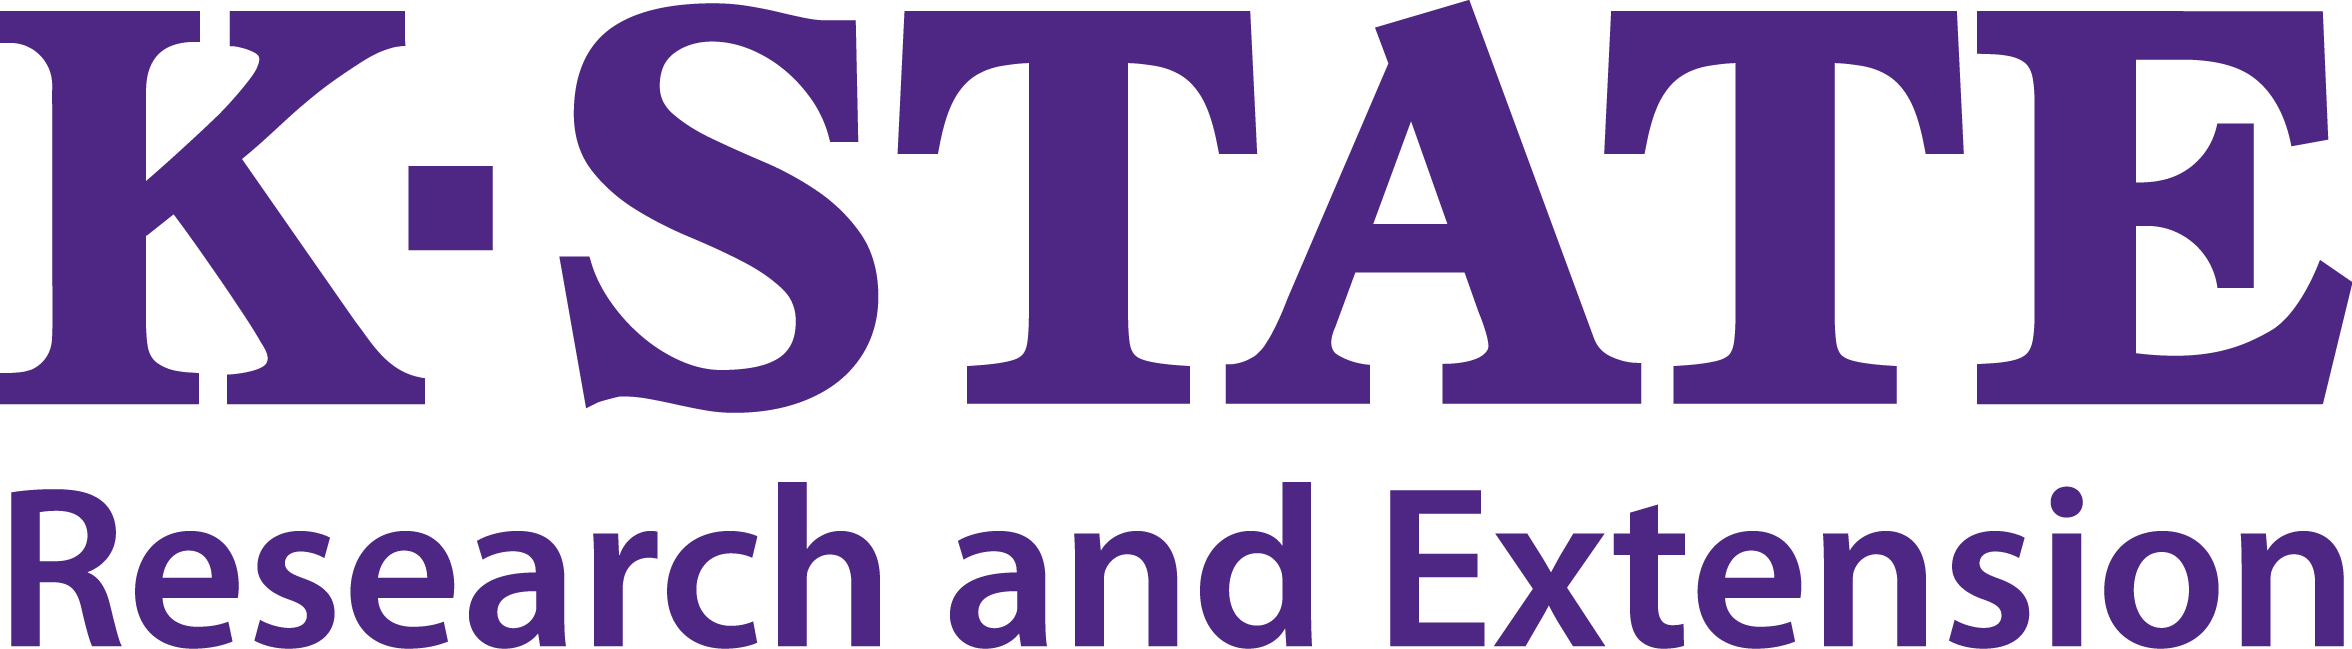 K-State Research and Extension (KSRE) 